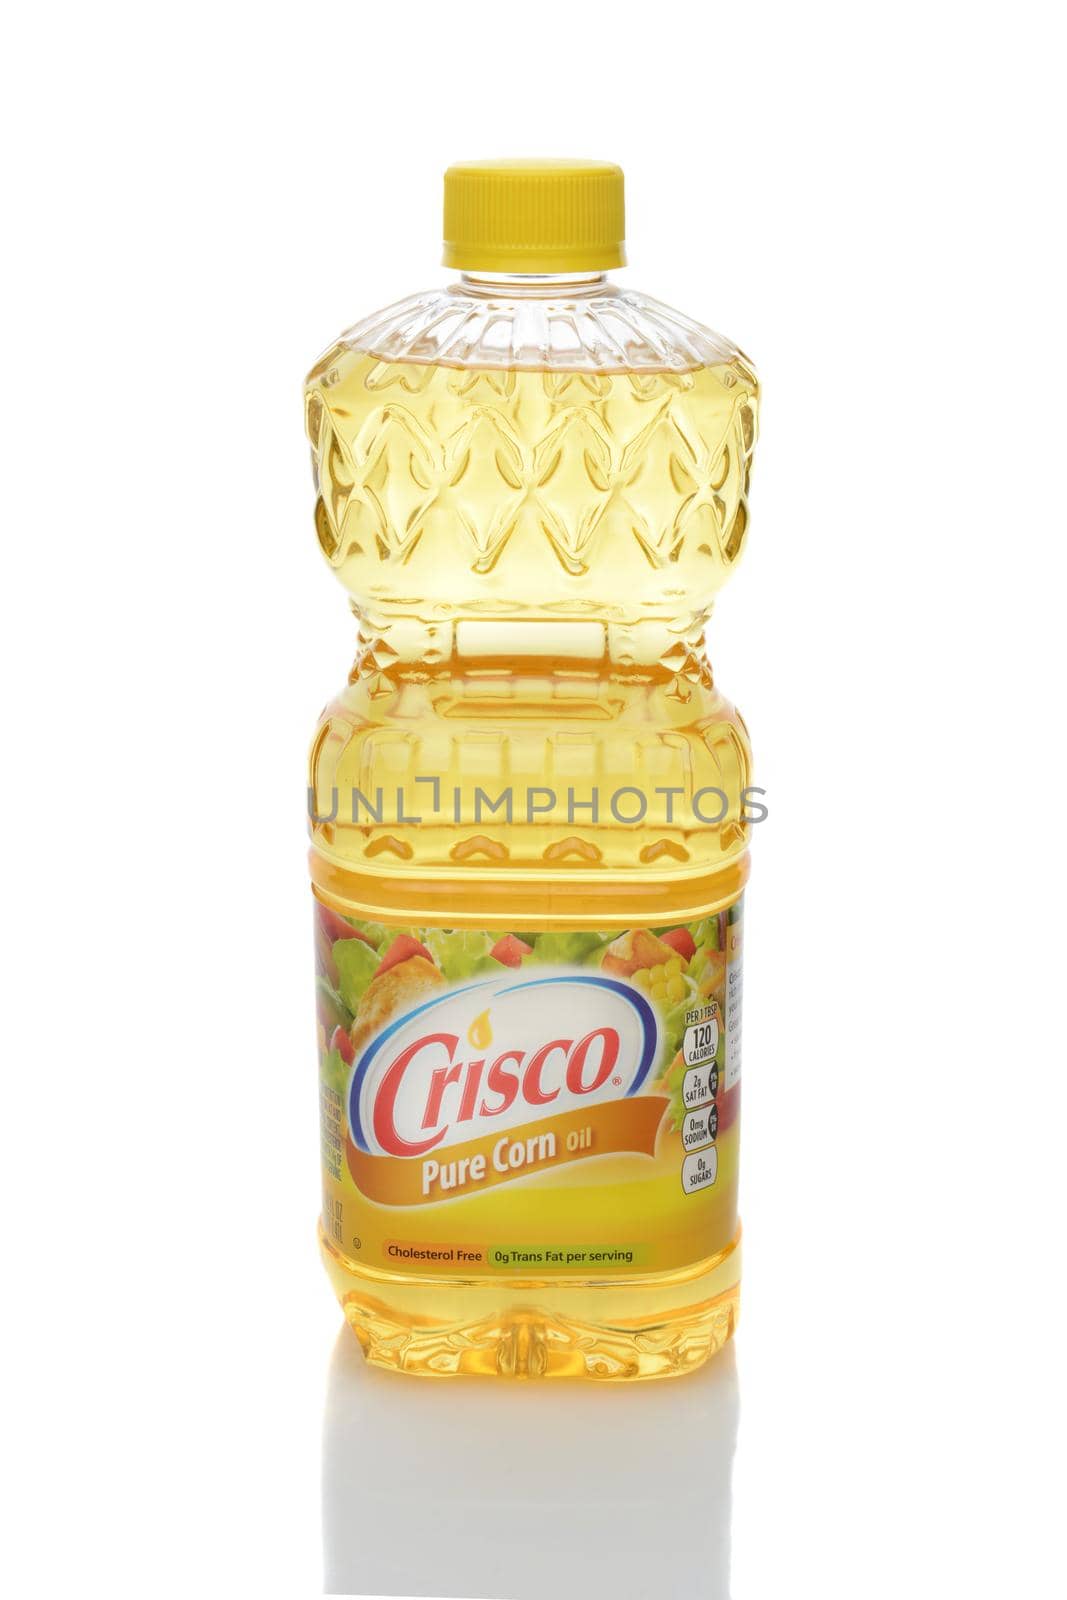 IRVINE, CA - DECEMBER 12, 2014: A bottle of Crisco Corn Oil. Crisco is a brand of shortening produced by The J.M. Smucker Company popular in the United States.